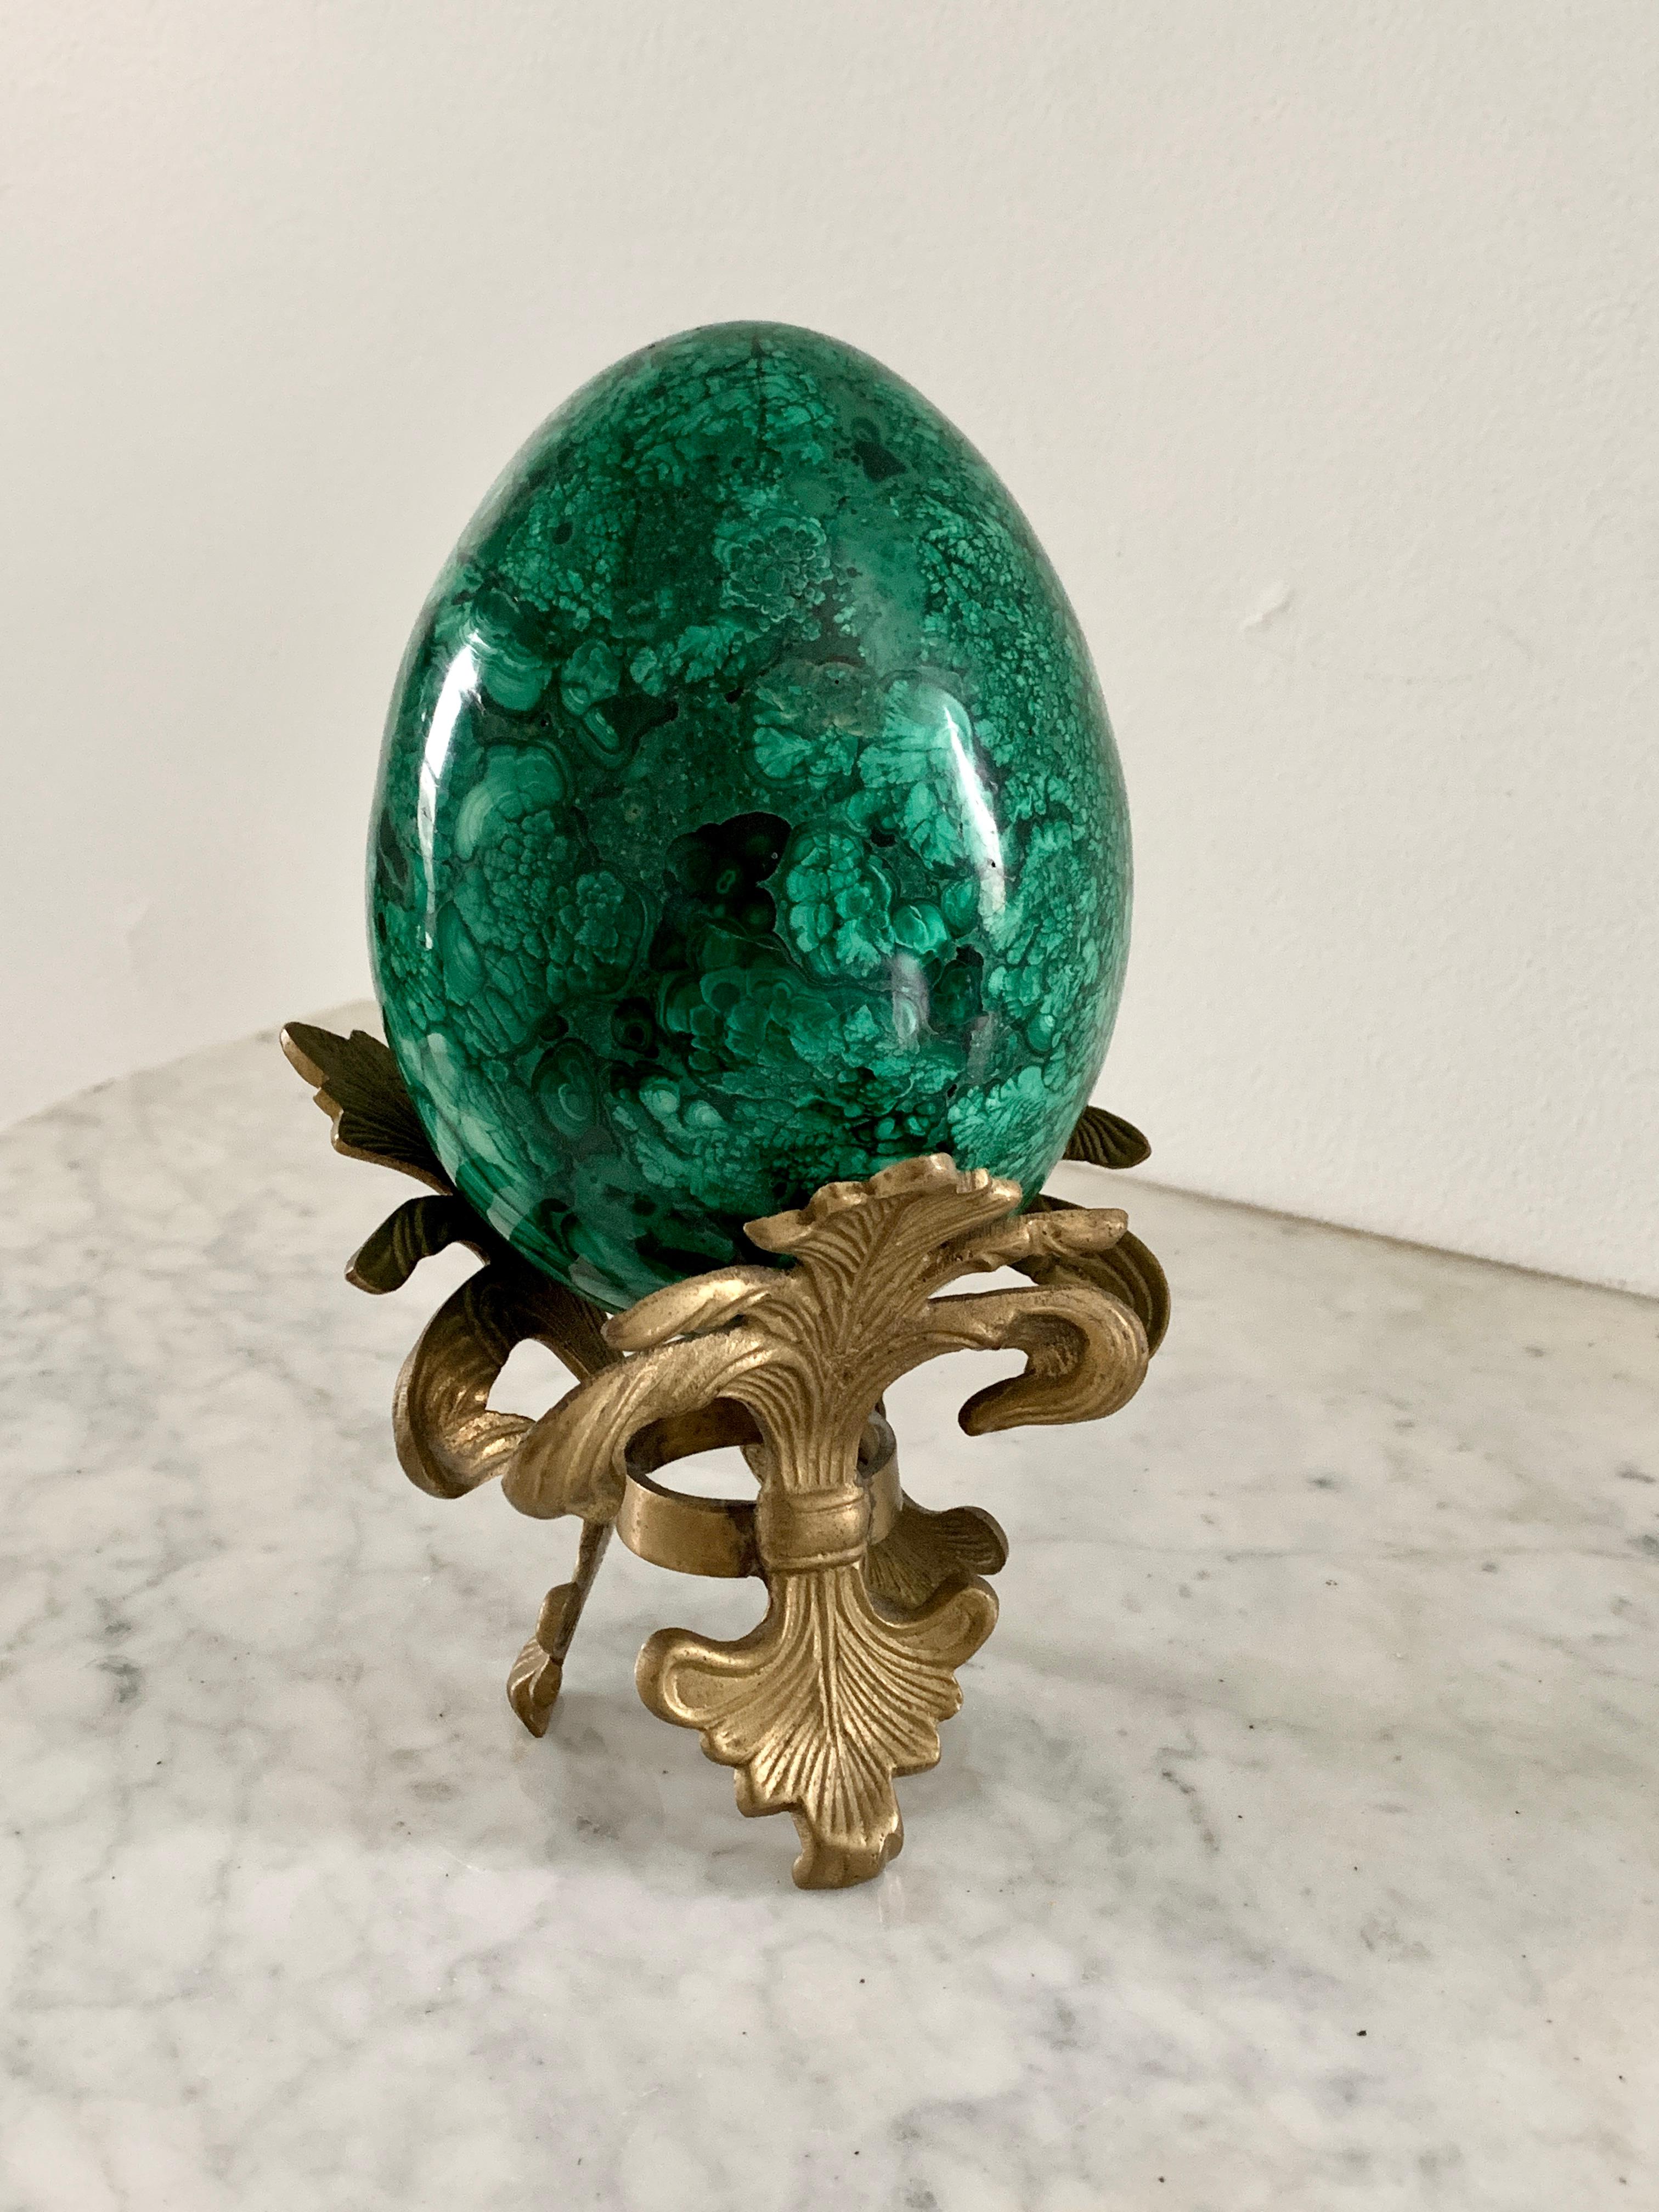 A stunning Russian style large malachite egg on Neoclassical style stand

Late 20th century

Solid malachite egg, with cast brass stand

Measures: 5